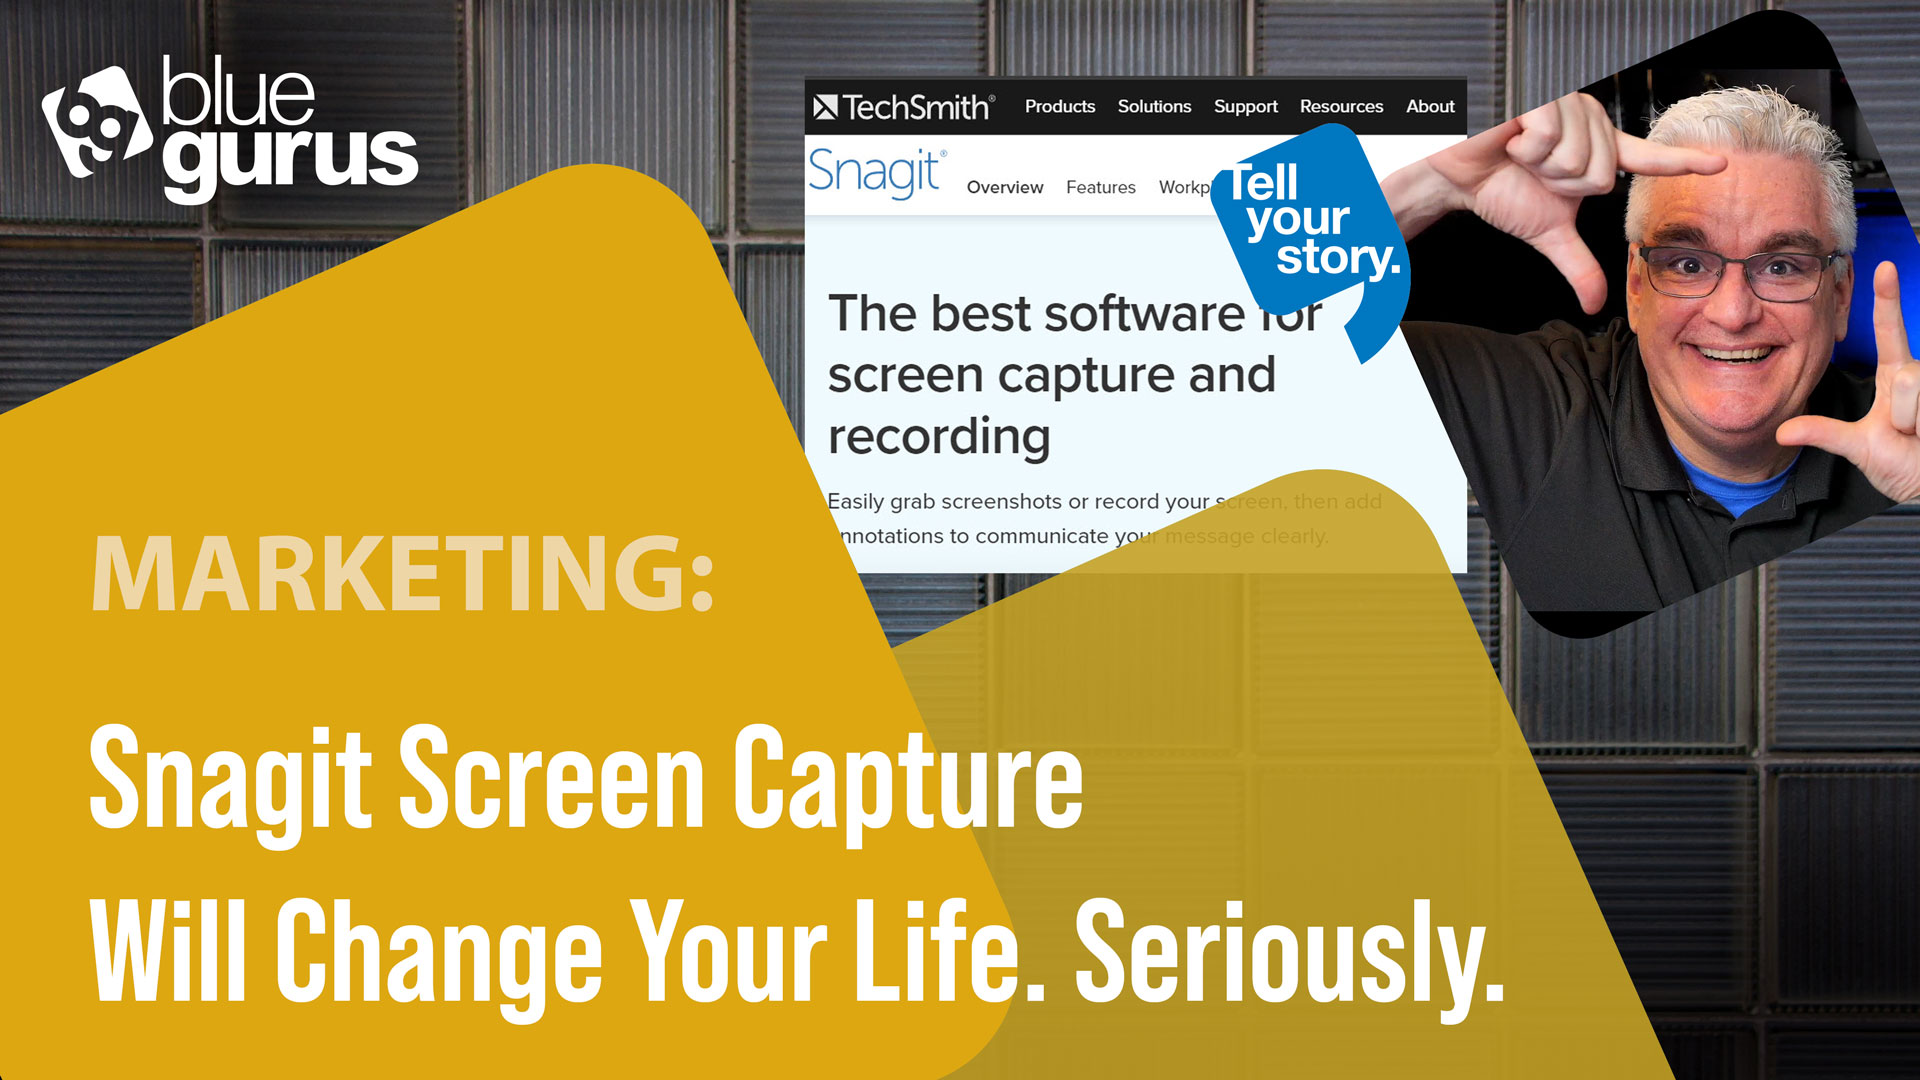 Snagit Screen Capture will change your life. Seriously.